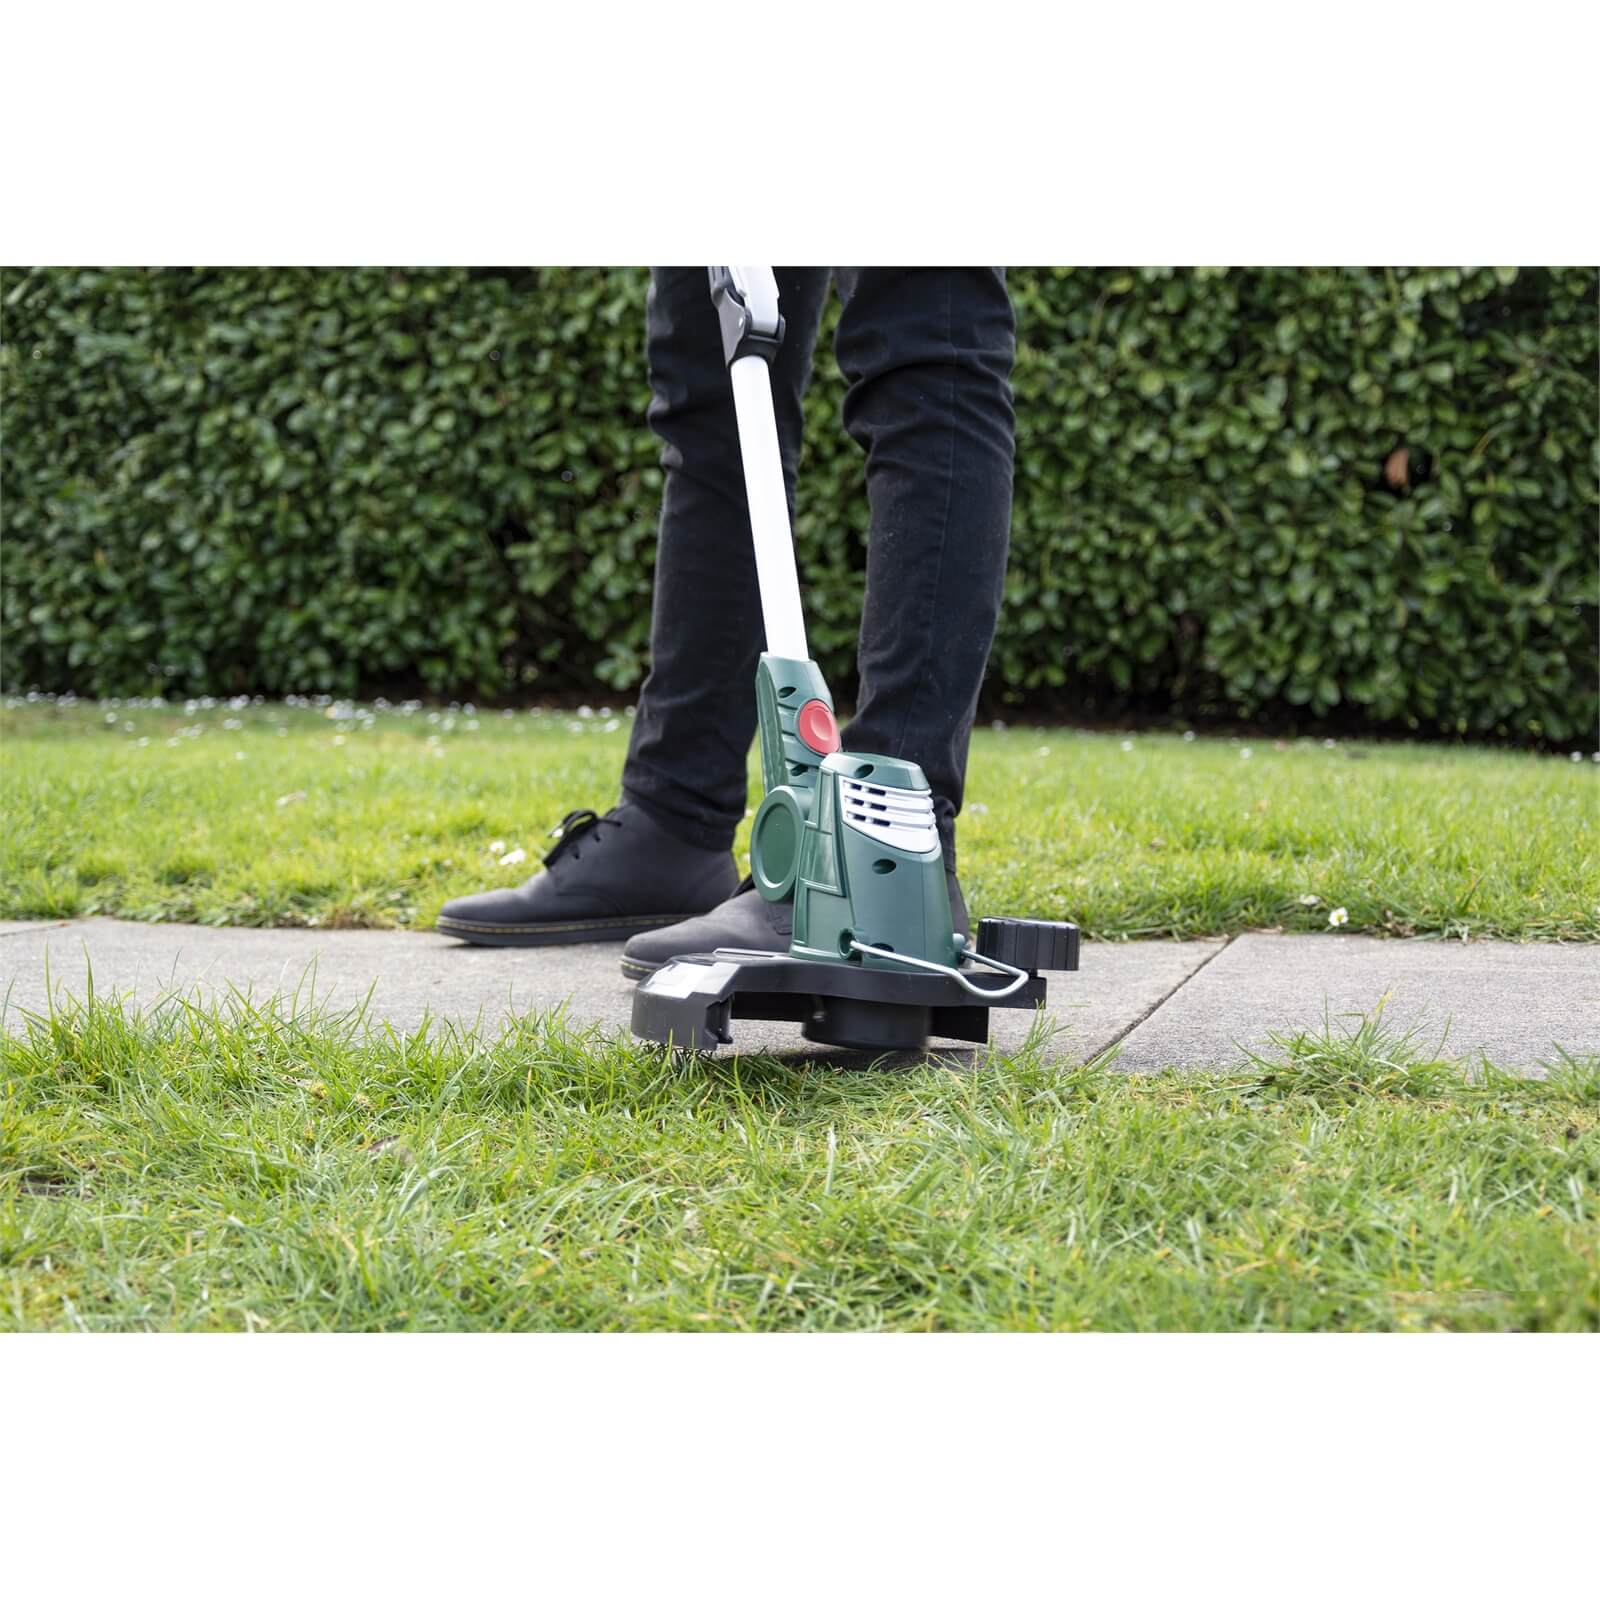 Webb 20V Linetrimmer With Battery Charger